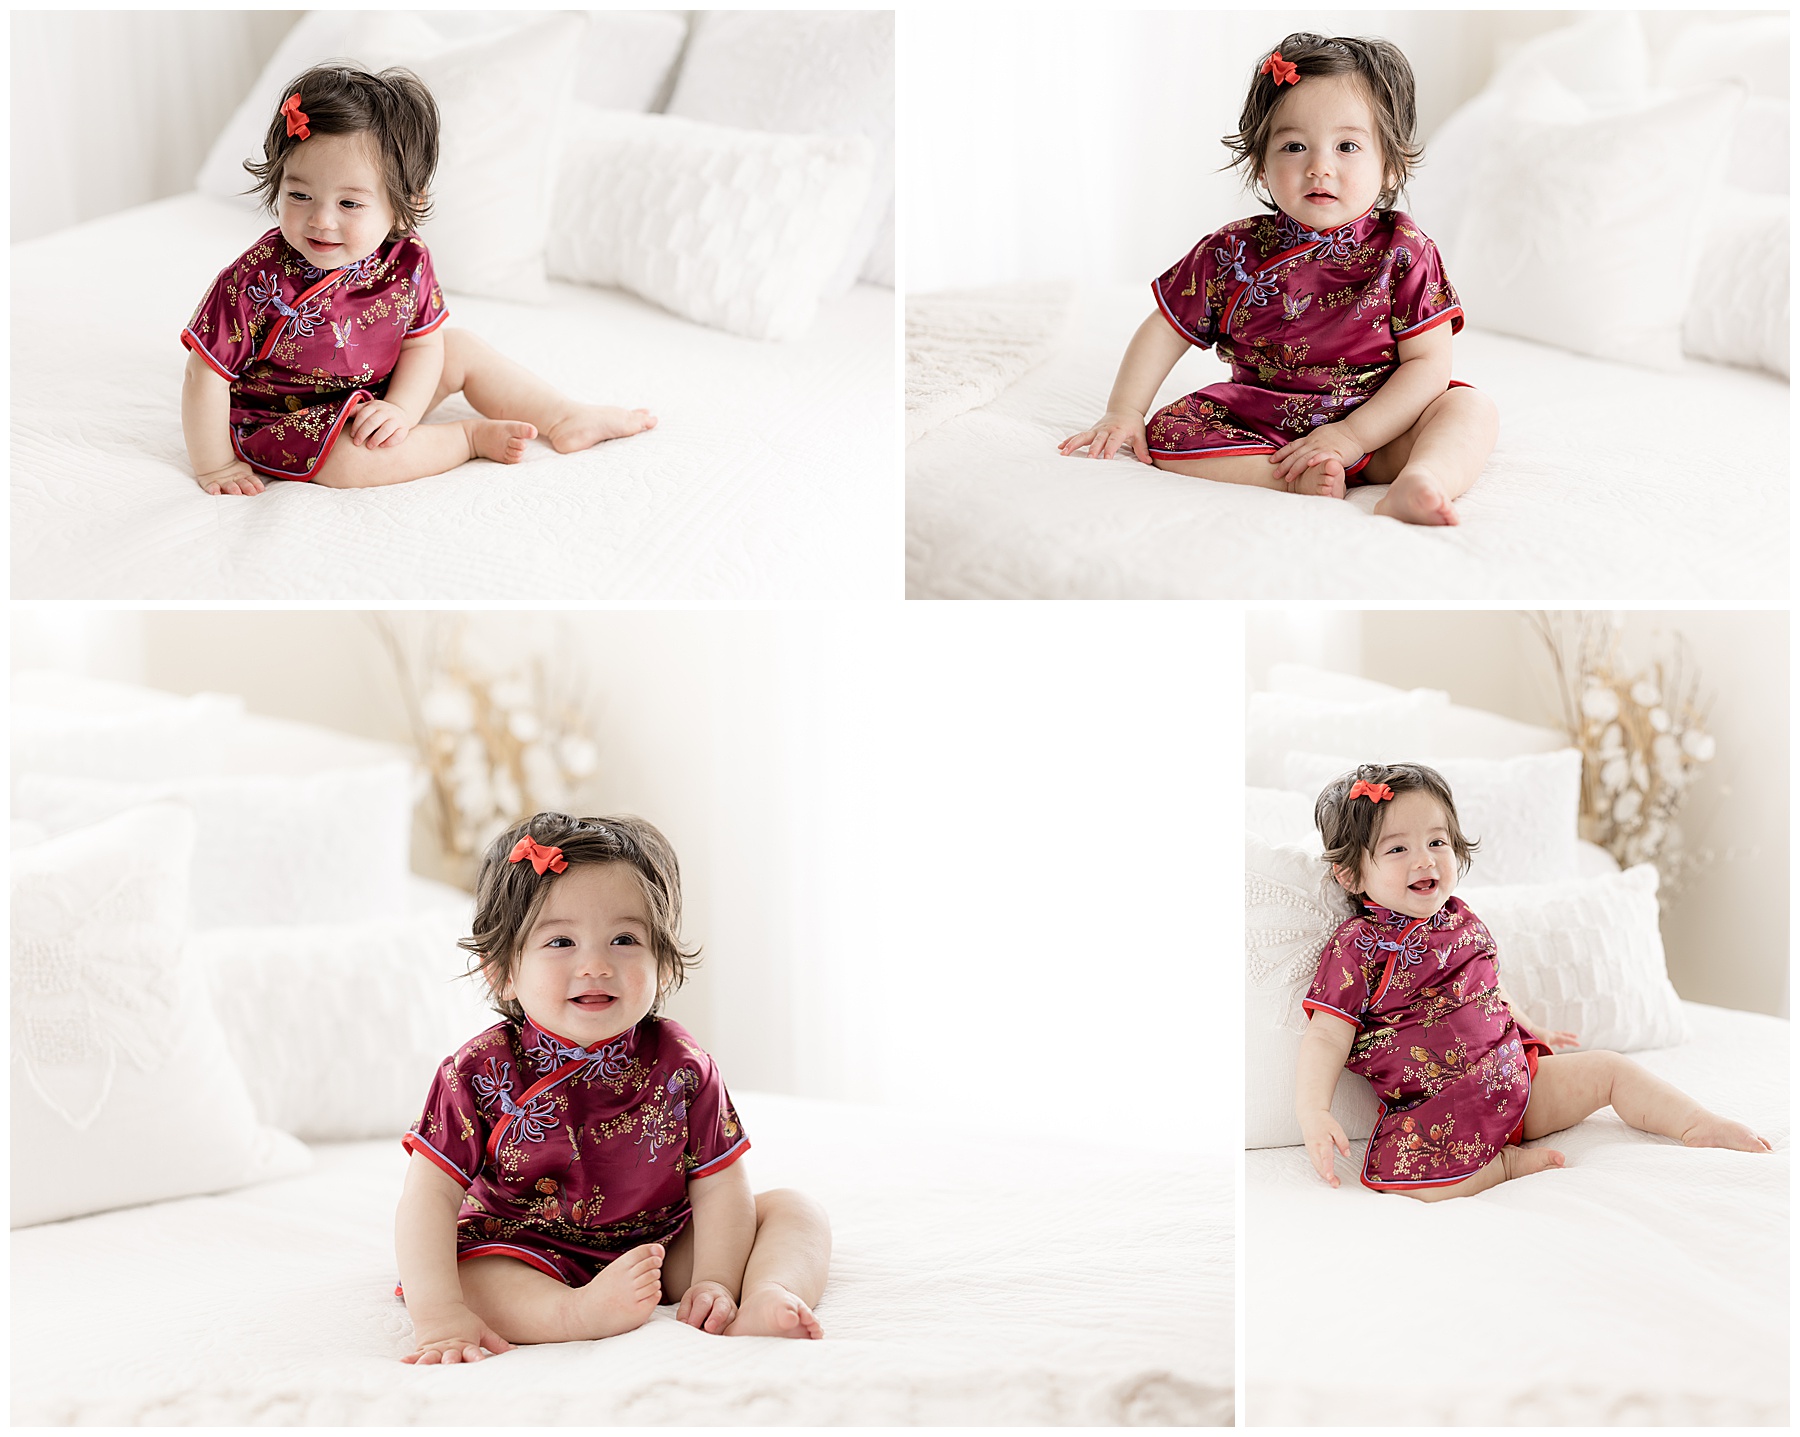 Beautiful half Chinese baby dressed in red sitting on a white bed during her cake smash photography photo session.